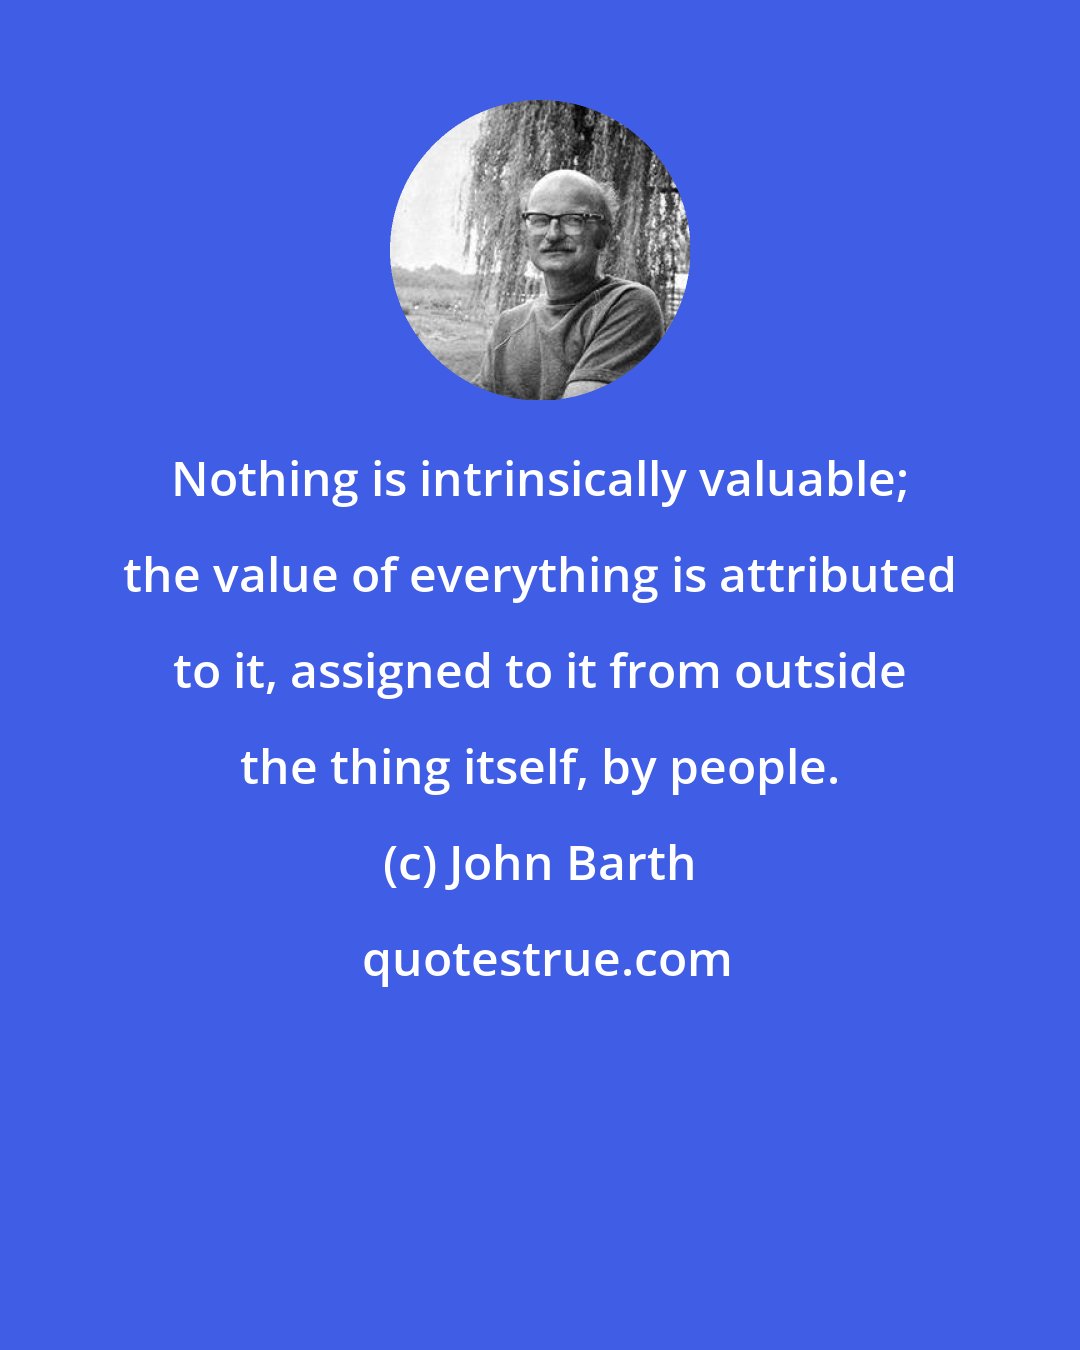 John Barth: Nothing is intrinsically valuable; the value of everything is attributed to it, assigned to it from outside the thing itself, by people.